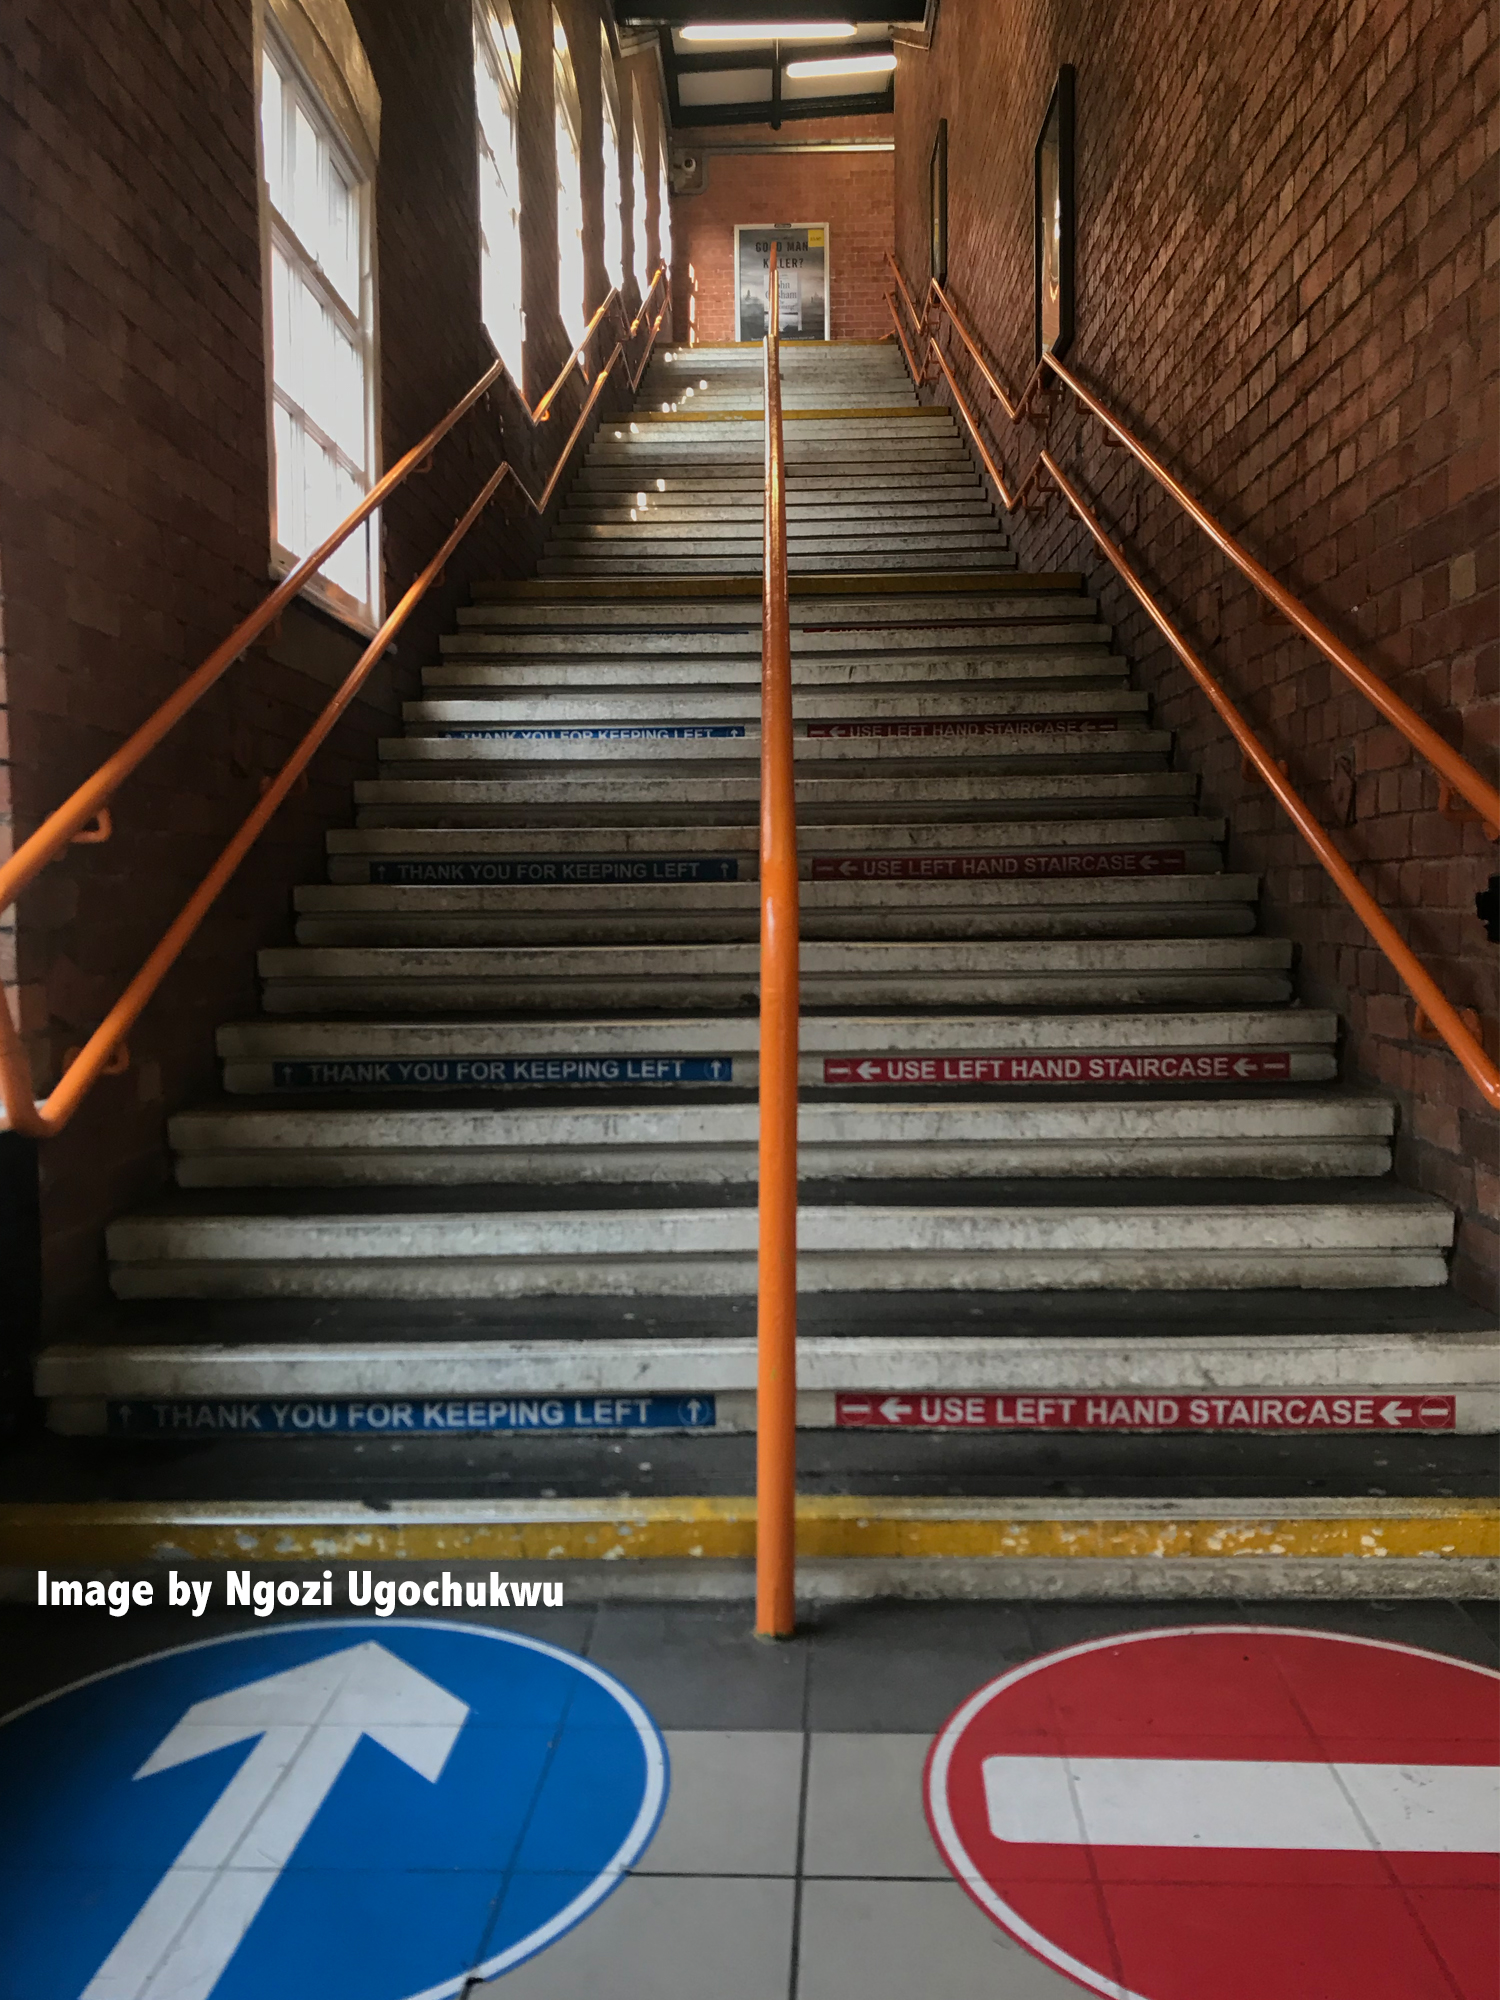 A view from the ground of grey concrete stairs looking upward with orange handrails